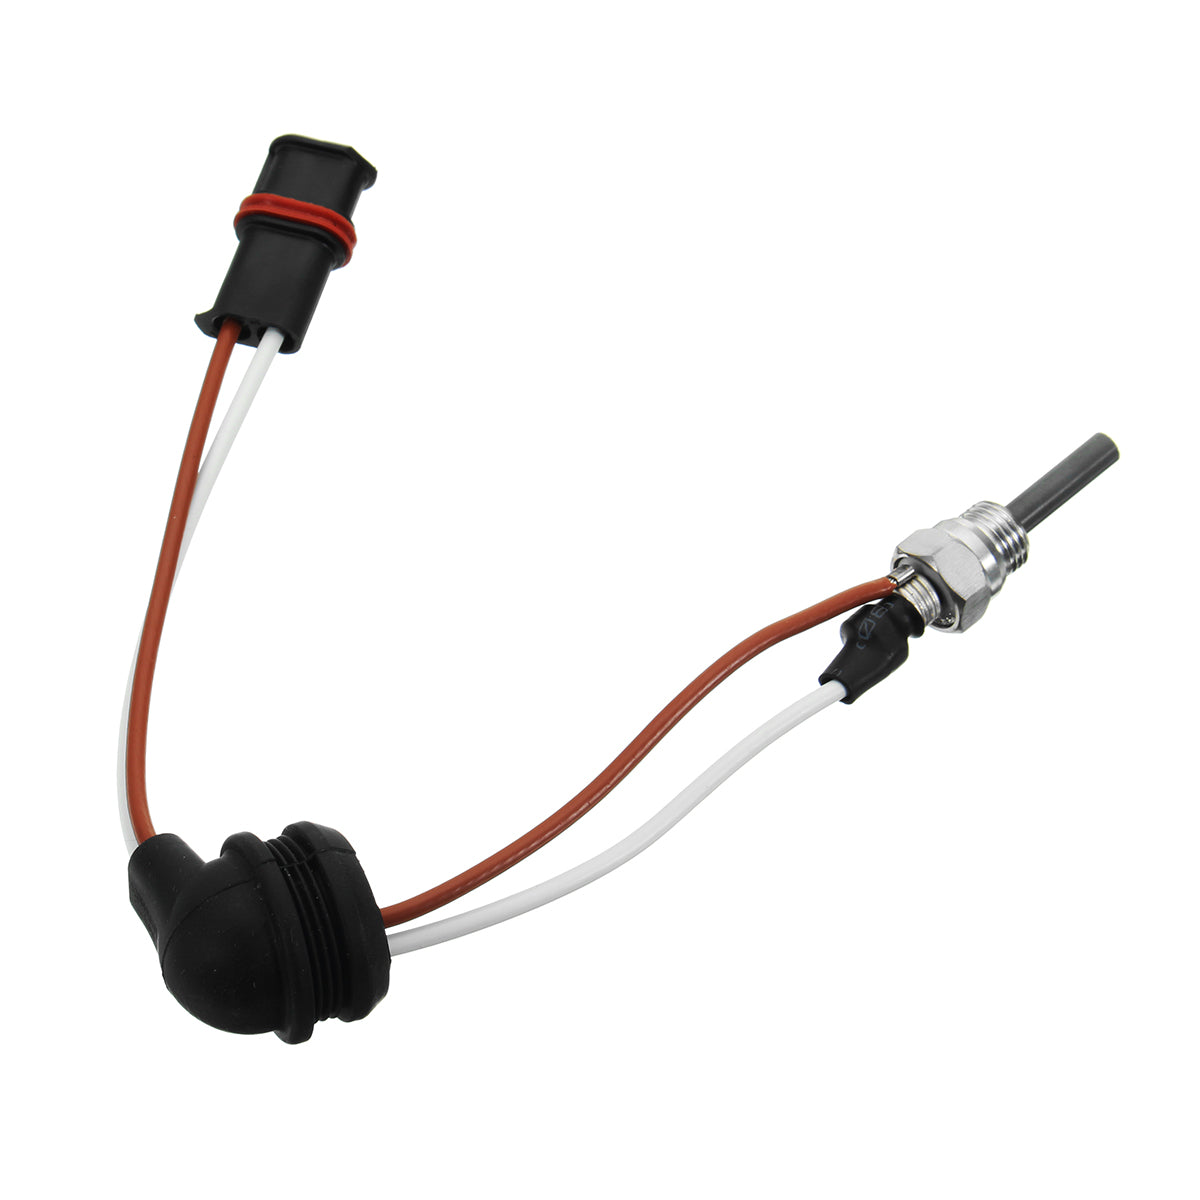 White Smoke 12V Spark Plug Ignition Wire Cable For Eberspacher D2 D4 Air Park Heater Tank